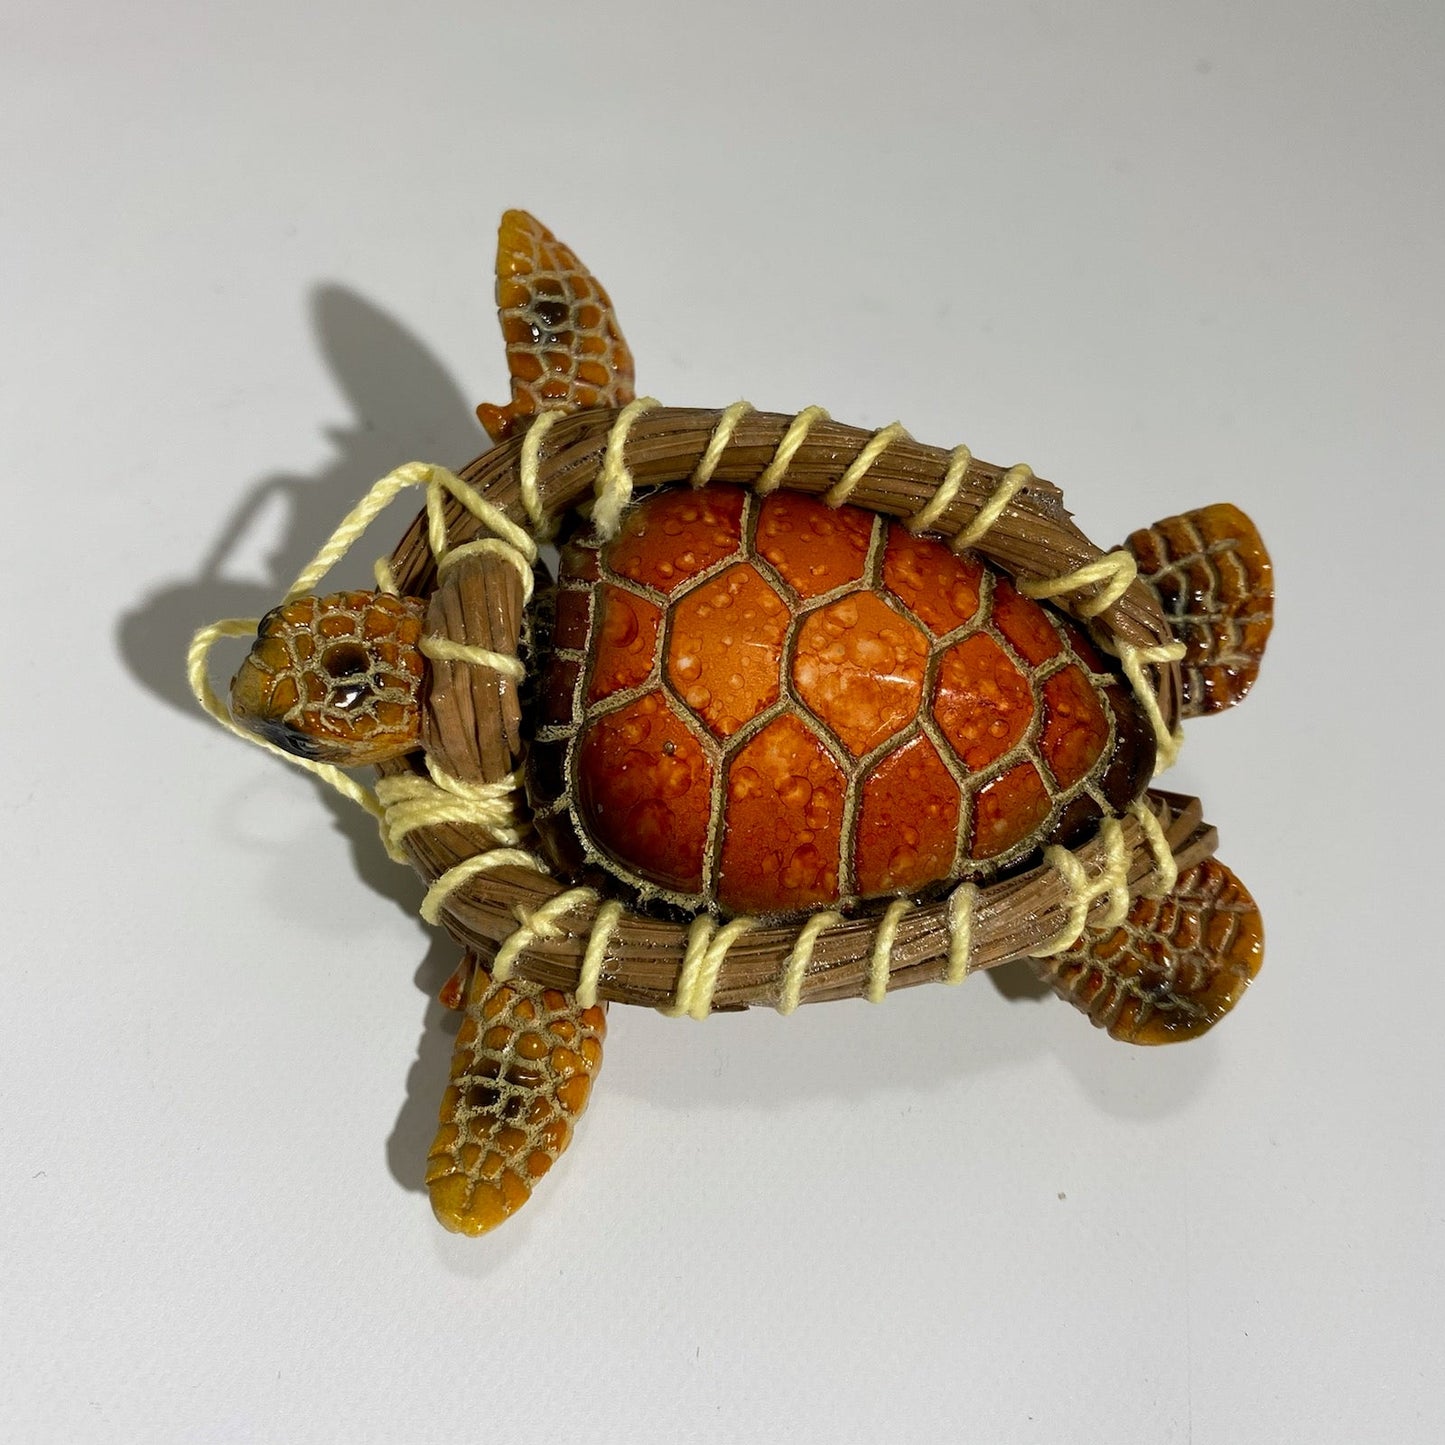 Donna Michaux Orange Pine Art Sea Turtles🎨 Pottery🎨 Buy Art at Carolina Creations Gallery in Downtown New Bern🎨